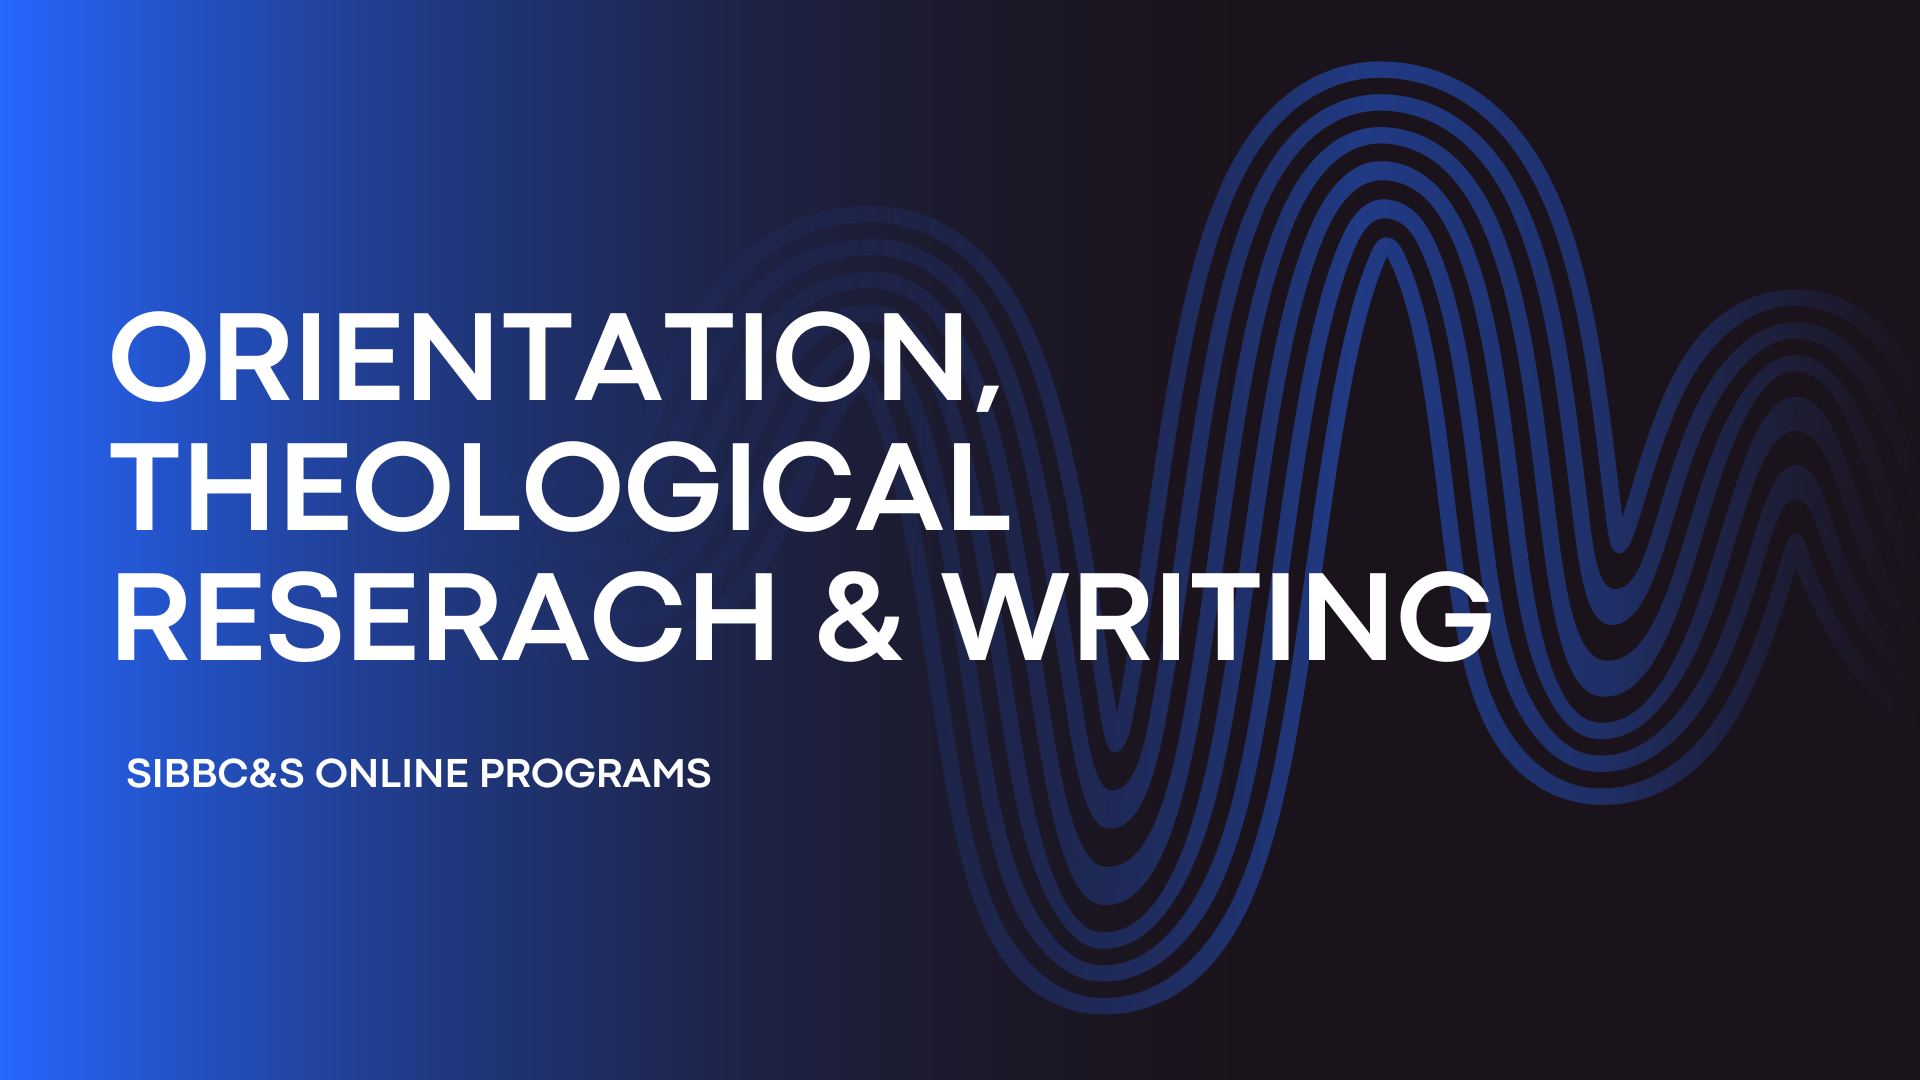 Orientation, Theological Research & Writing 01/24